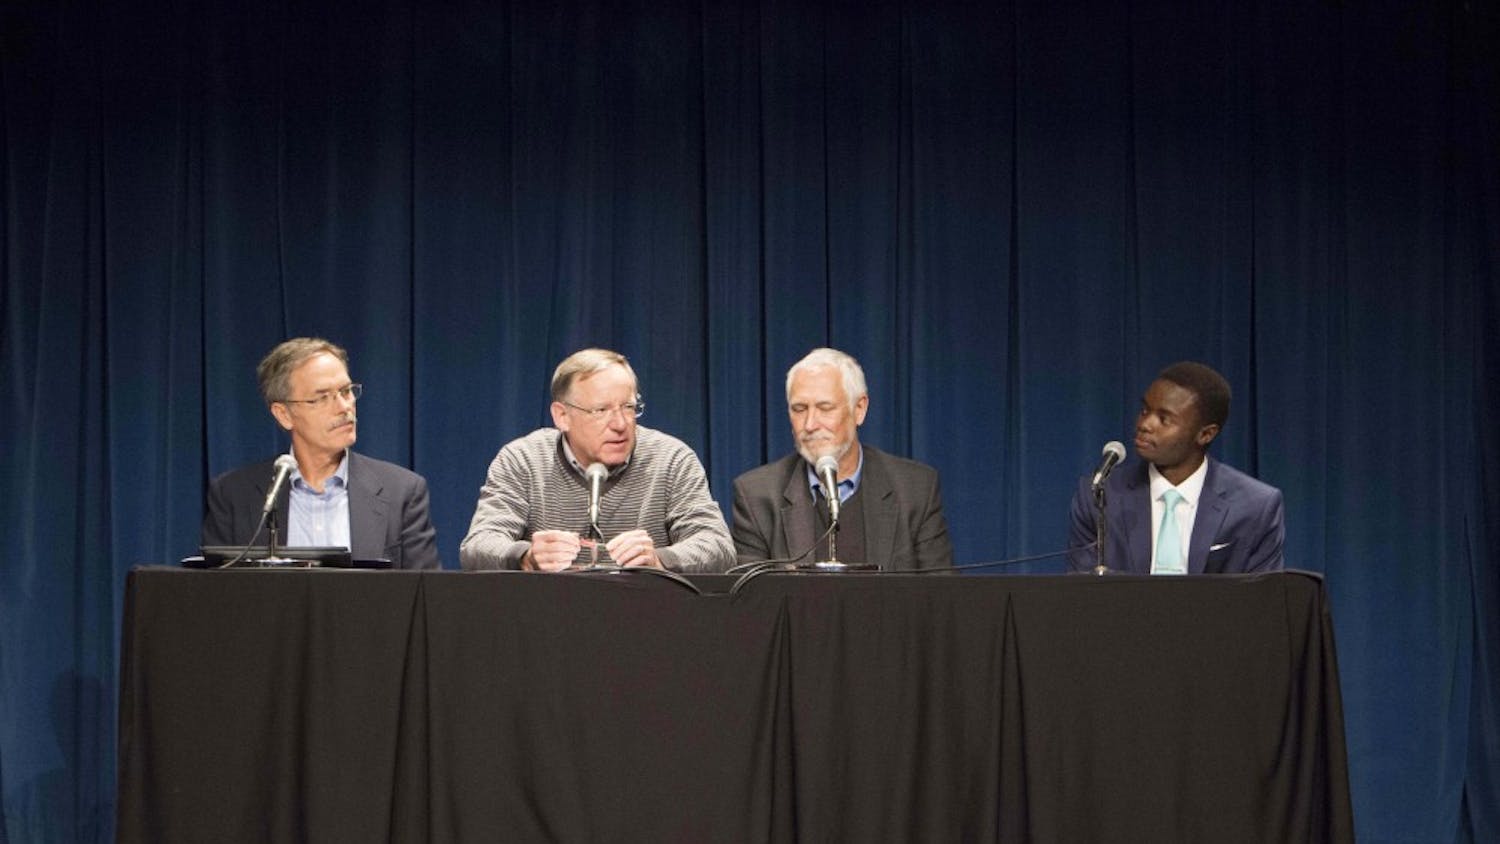 Panel members met to discuss climate change on Thursday evening in the Whittenberger Auditorium. Jeffrey White, second from the left and a professor and researcher of climate change, was the first to speak.&nbsp;